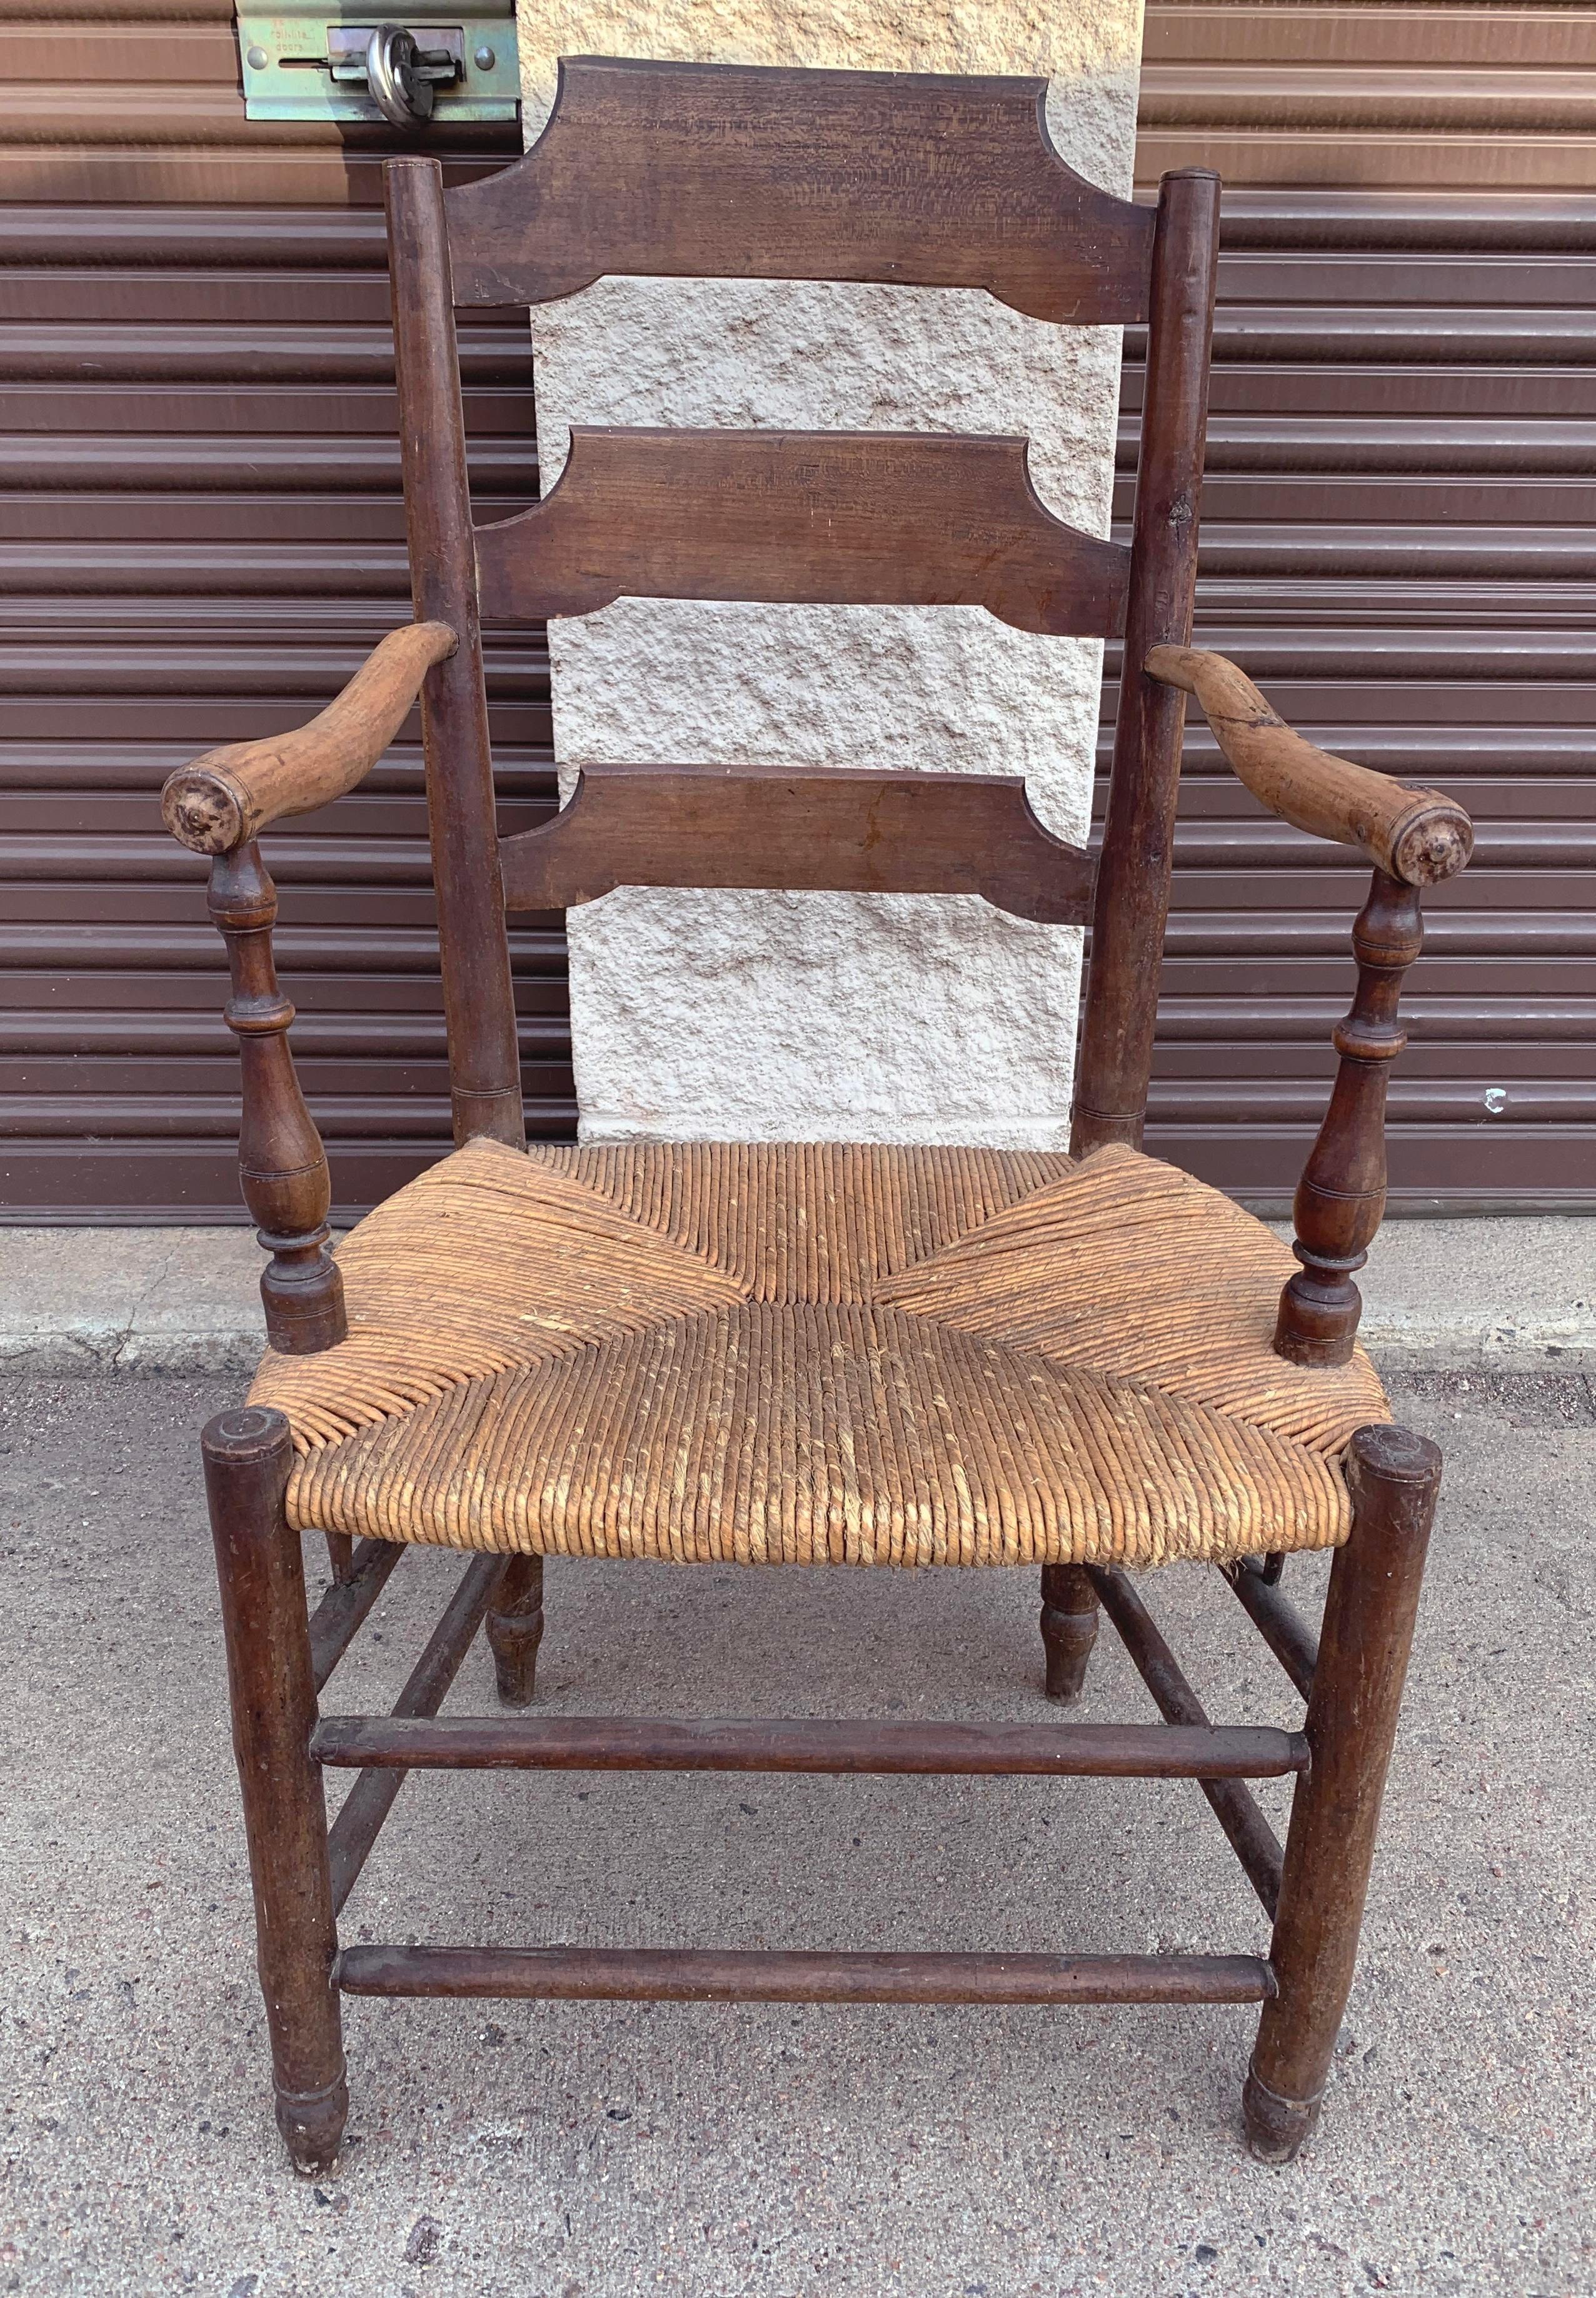 Antique Ash rush armchair from France, c 1820. Features dark ash wood and sloped arms on turned posts. The back slates feature distinctively French sloping detail. Rush seat is good condition, but shows sign of wear from age.

Acquired on buying